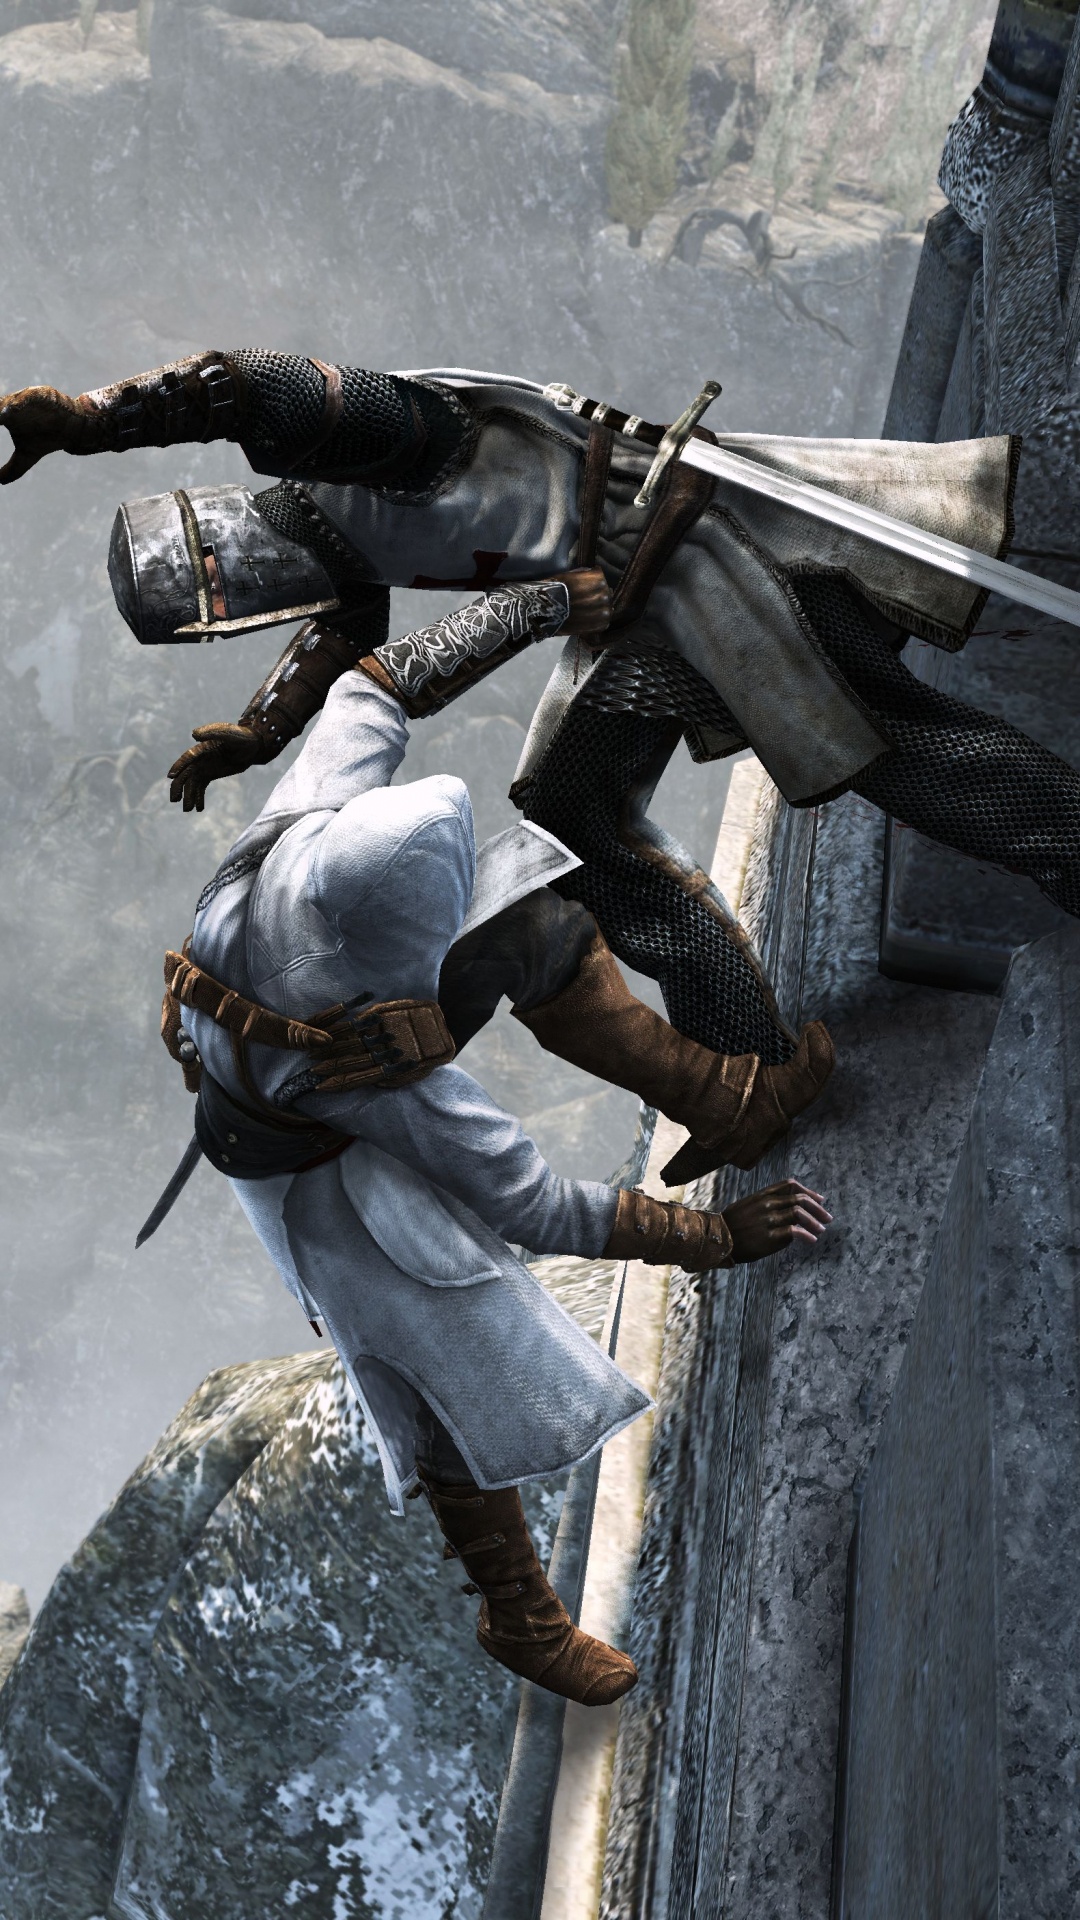 Assassins Creed, Assassins Creed Revelations, Assassins Creed Brotherhood, Assassins Creed III, Ezio Auditore. Wallpaper in 1080x1920 Resolution